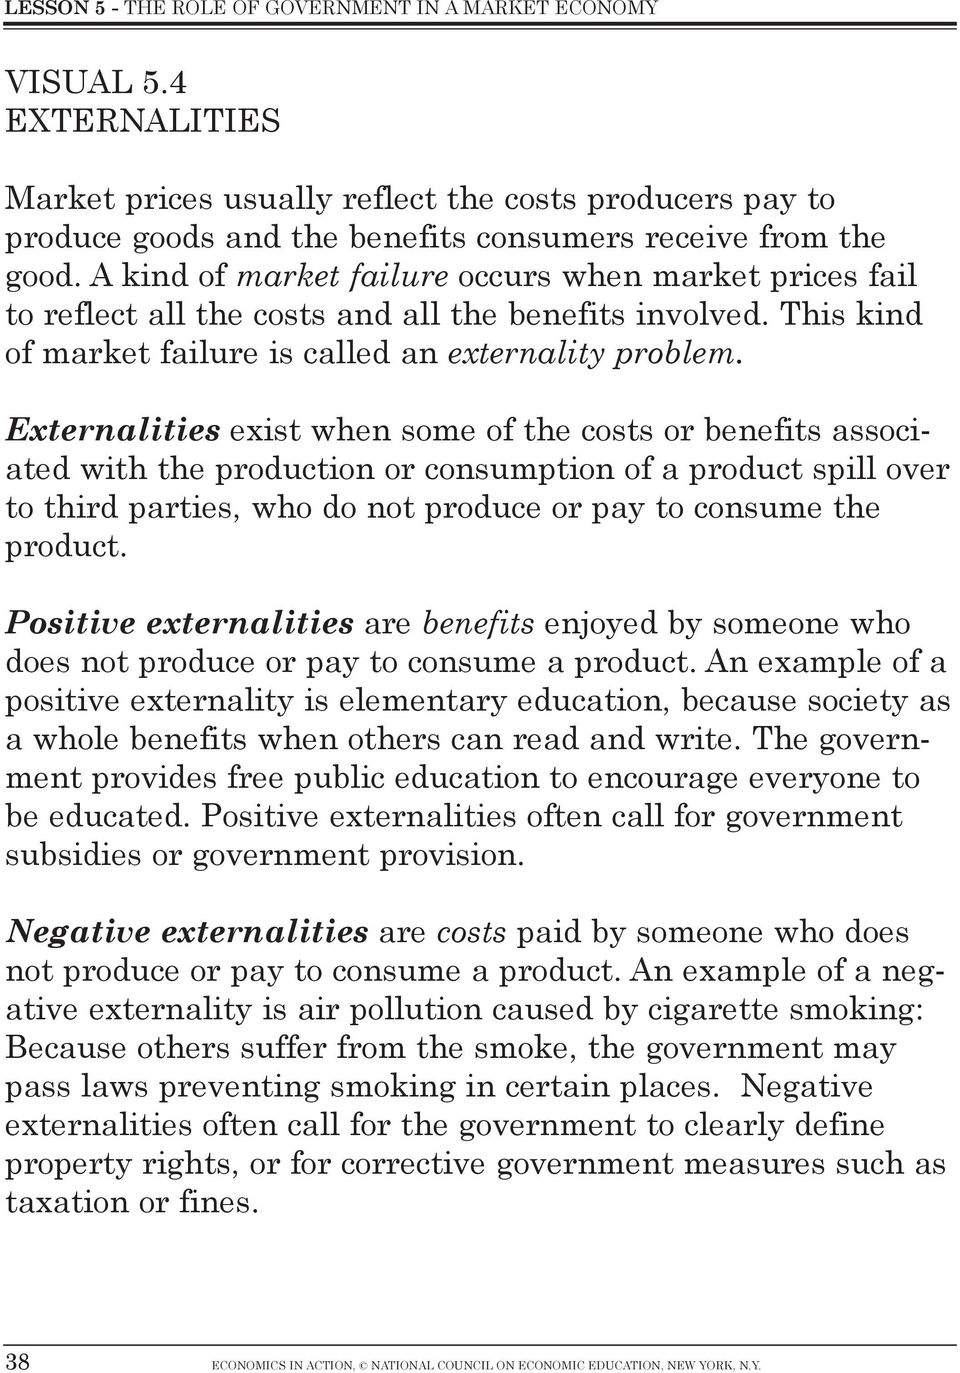 Externalities exist when some of the costs or benefits associated with the production or consumption of a product spill over to third parties, who do not produce or pay to consume the product.